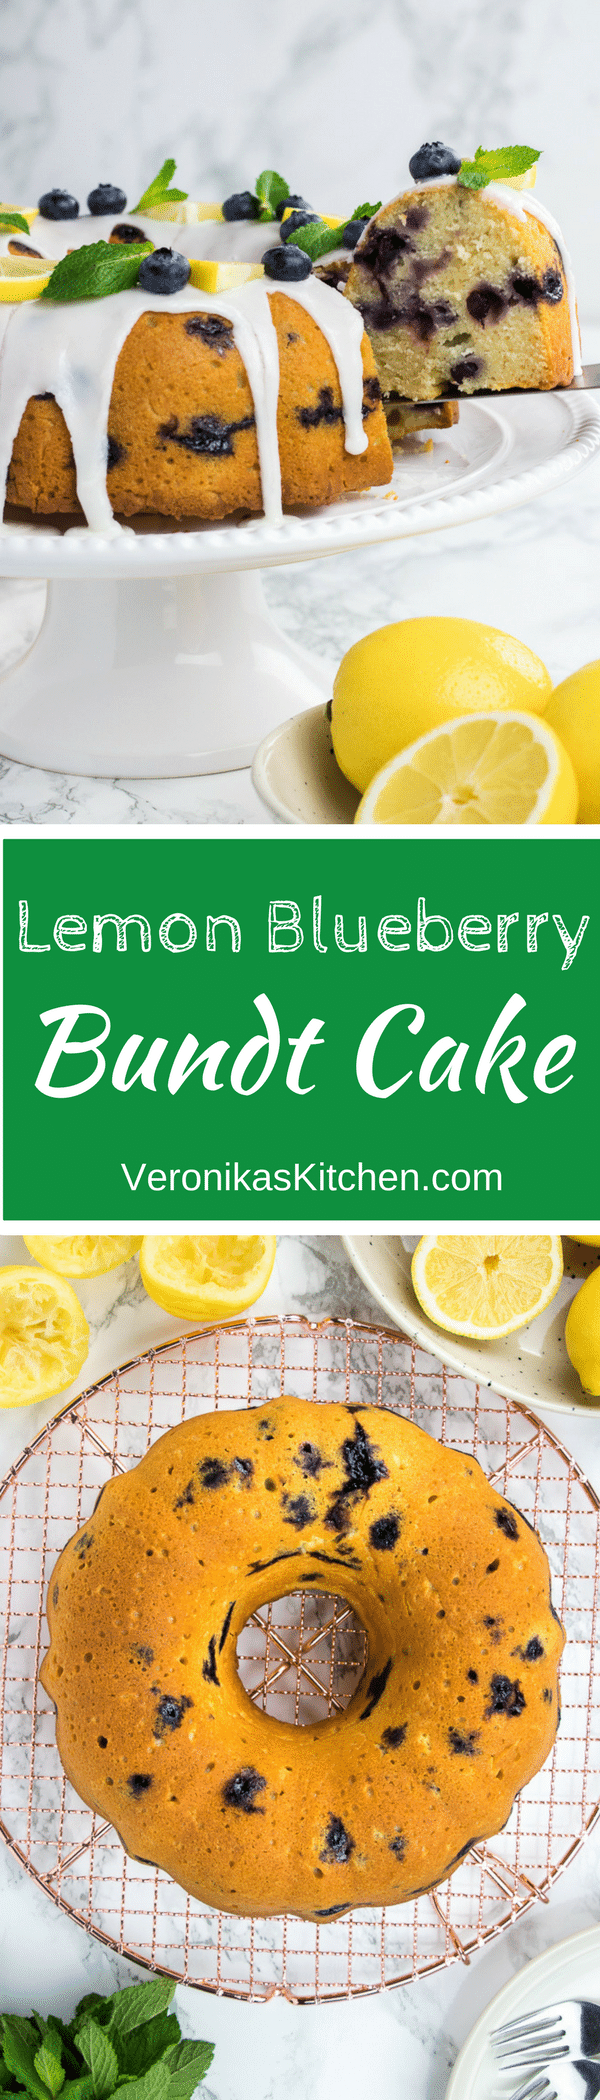 Lemon Blueberry Bundt Cake is a great summer dessert idea that is easy to make from scratch. 